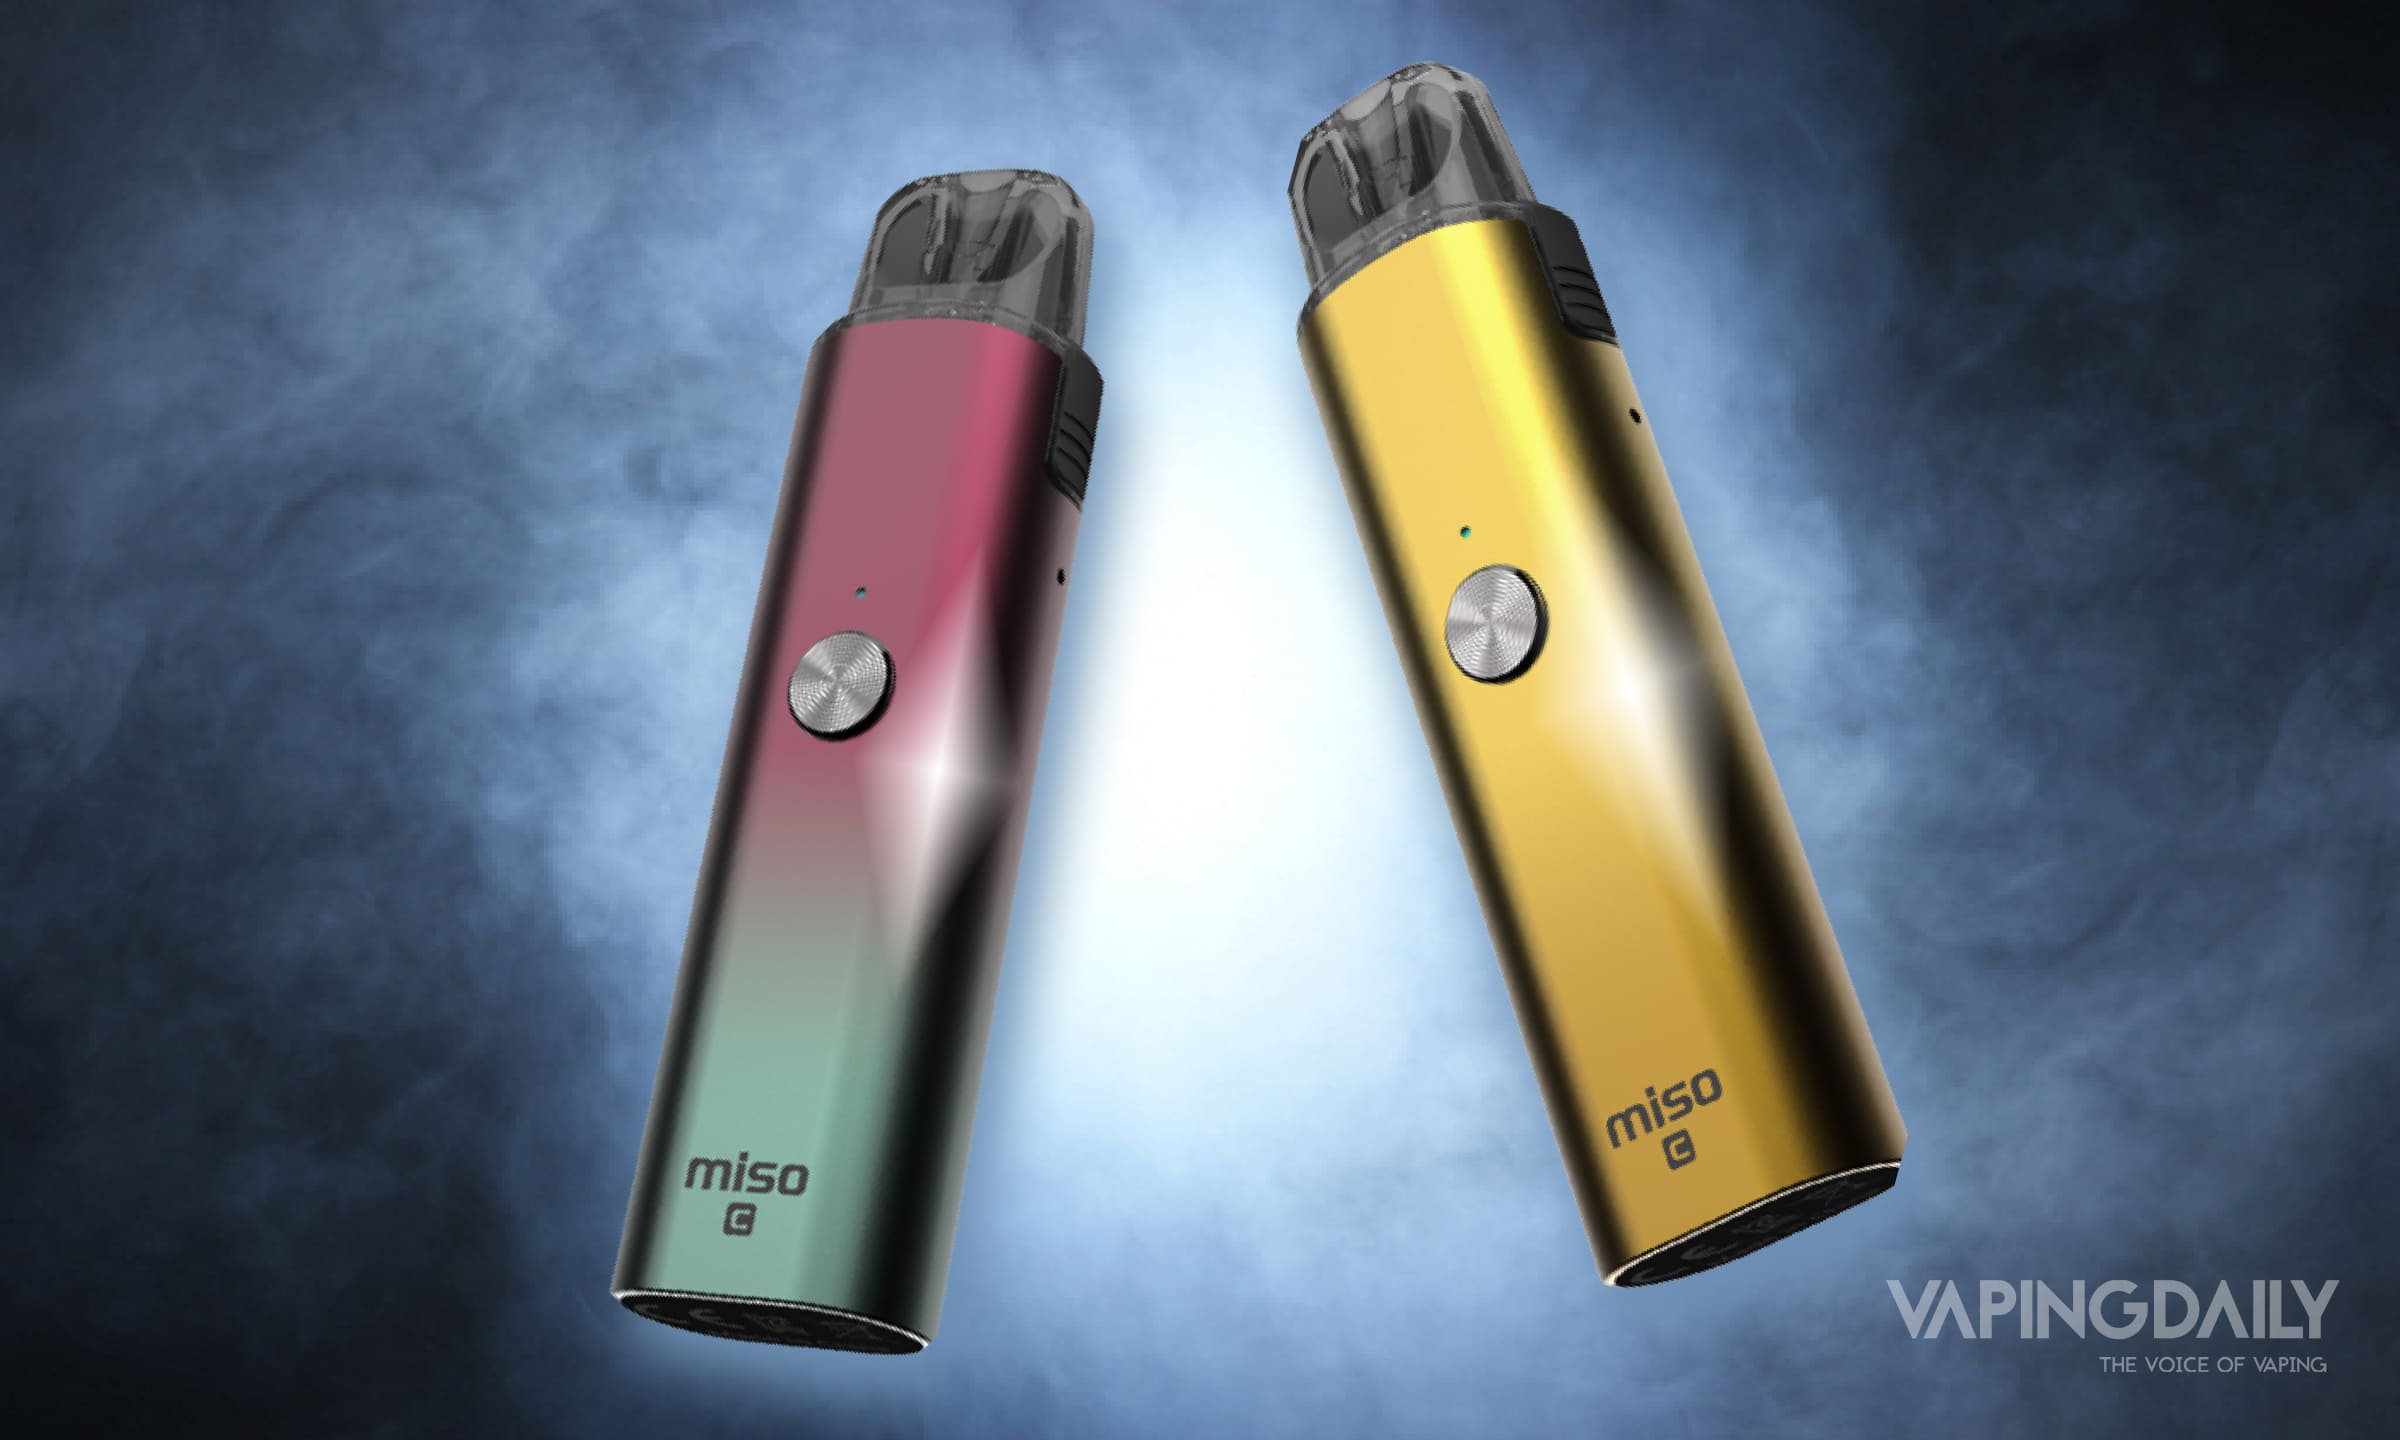 The Univapo Miso Pod C: The New and Improved Pod Mod from Univapo